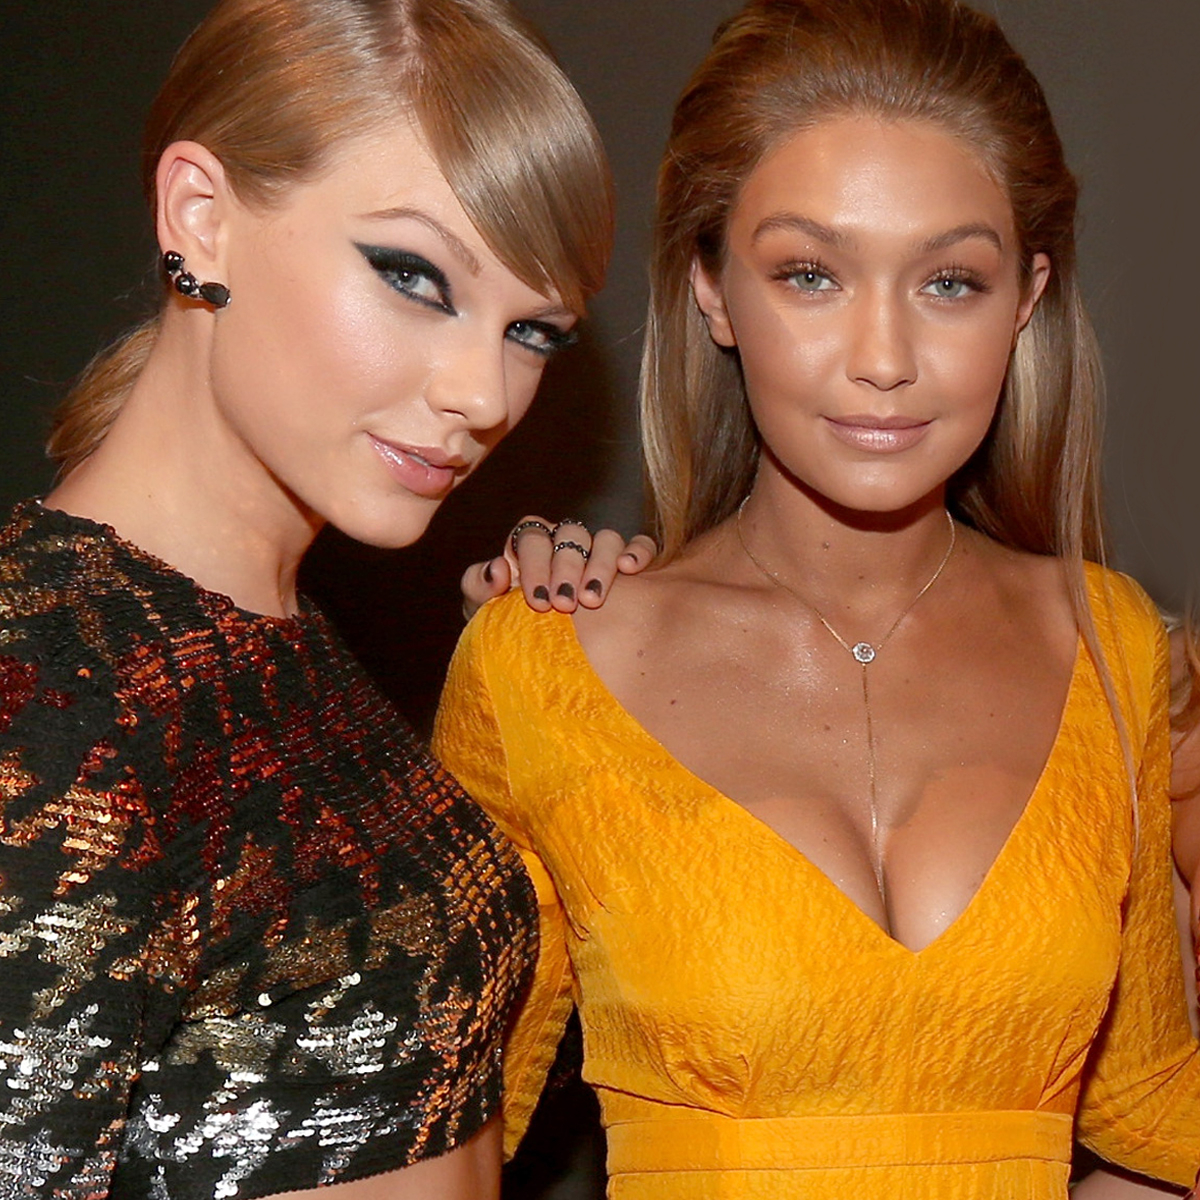 Why Gigi Hadid Says She’s Taylor Swift’s “Most Embarrassing Friend”